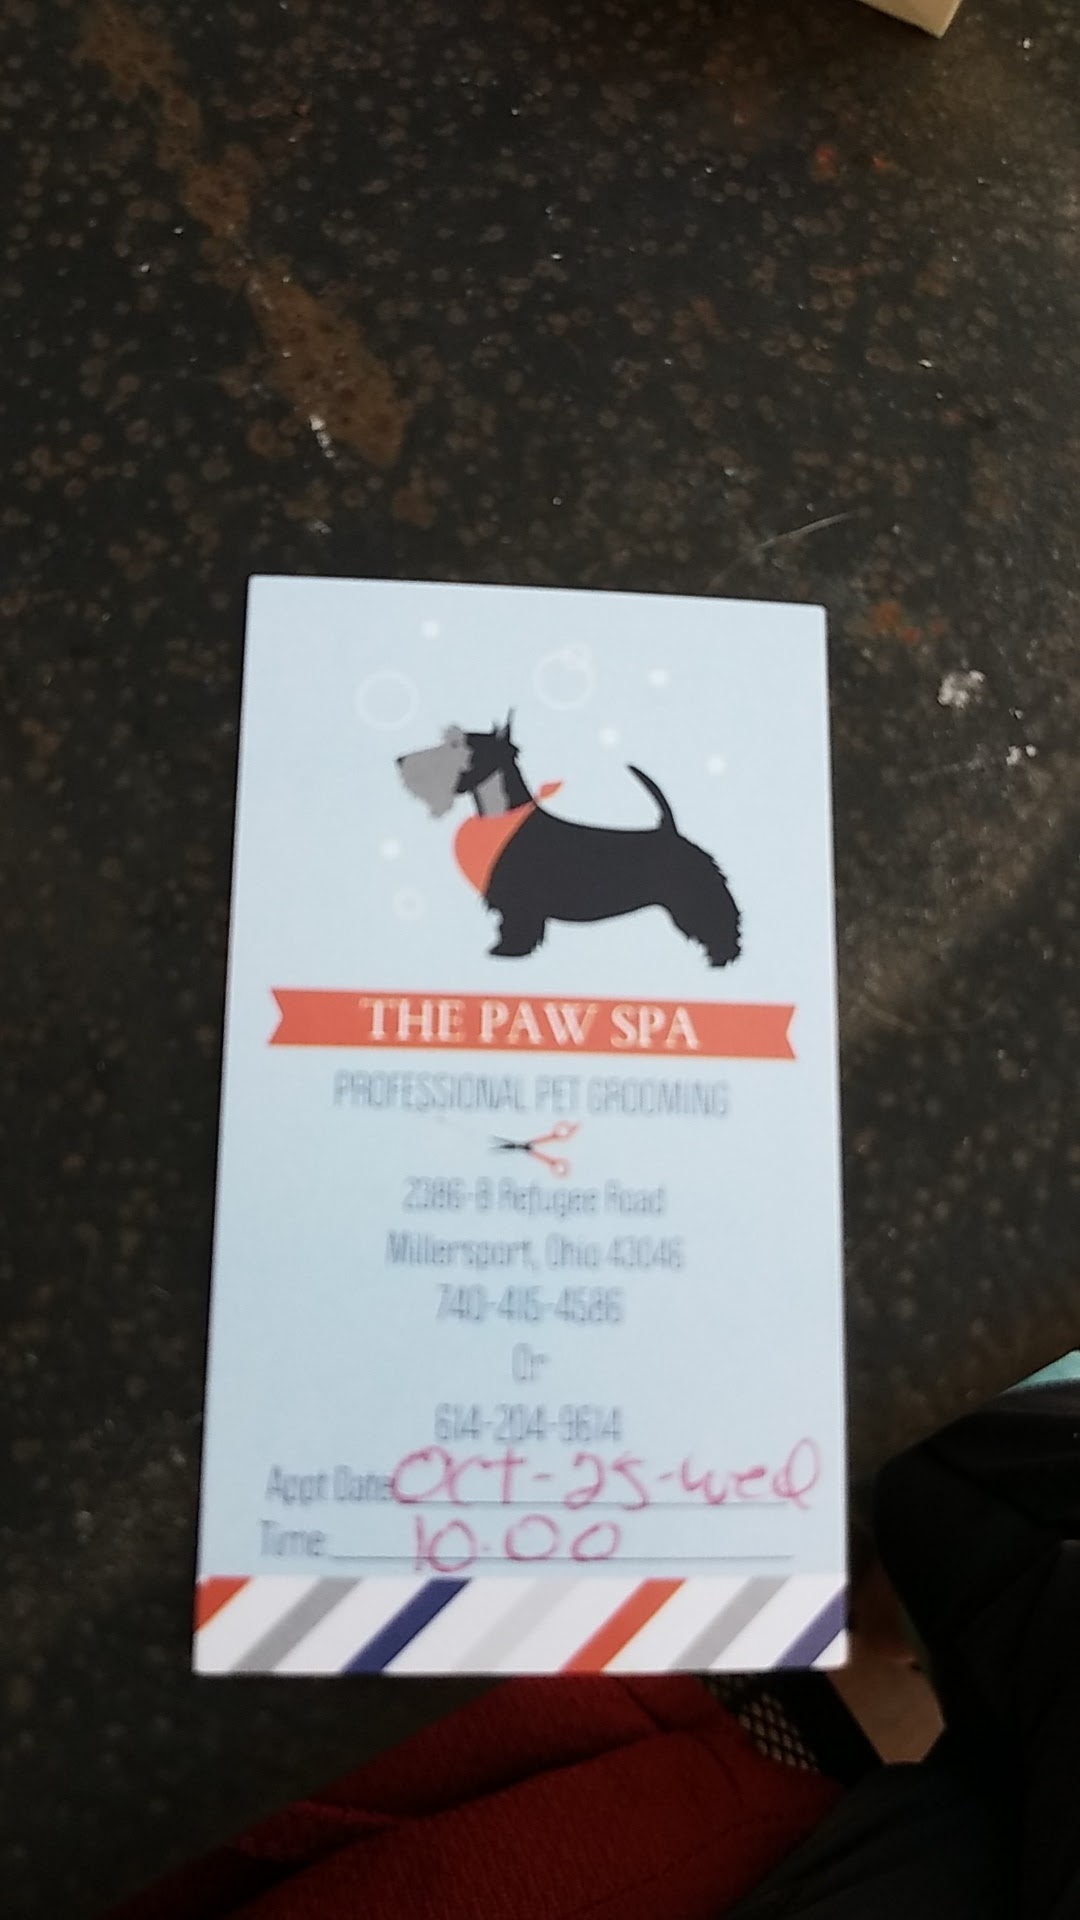 THE PAW SPA 2386-b Refugee St, Millersport Ohio 43046